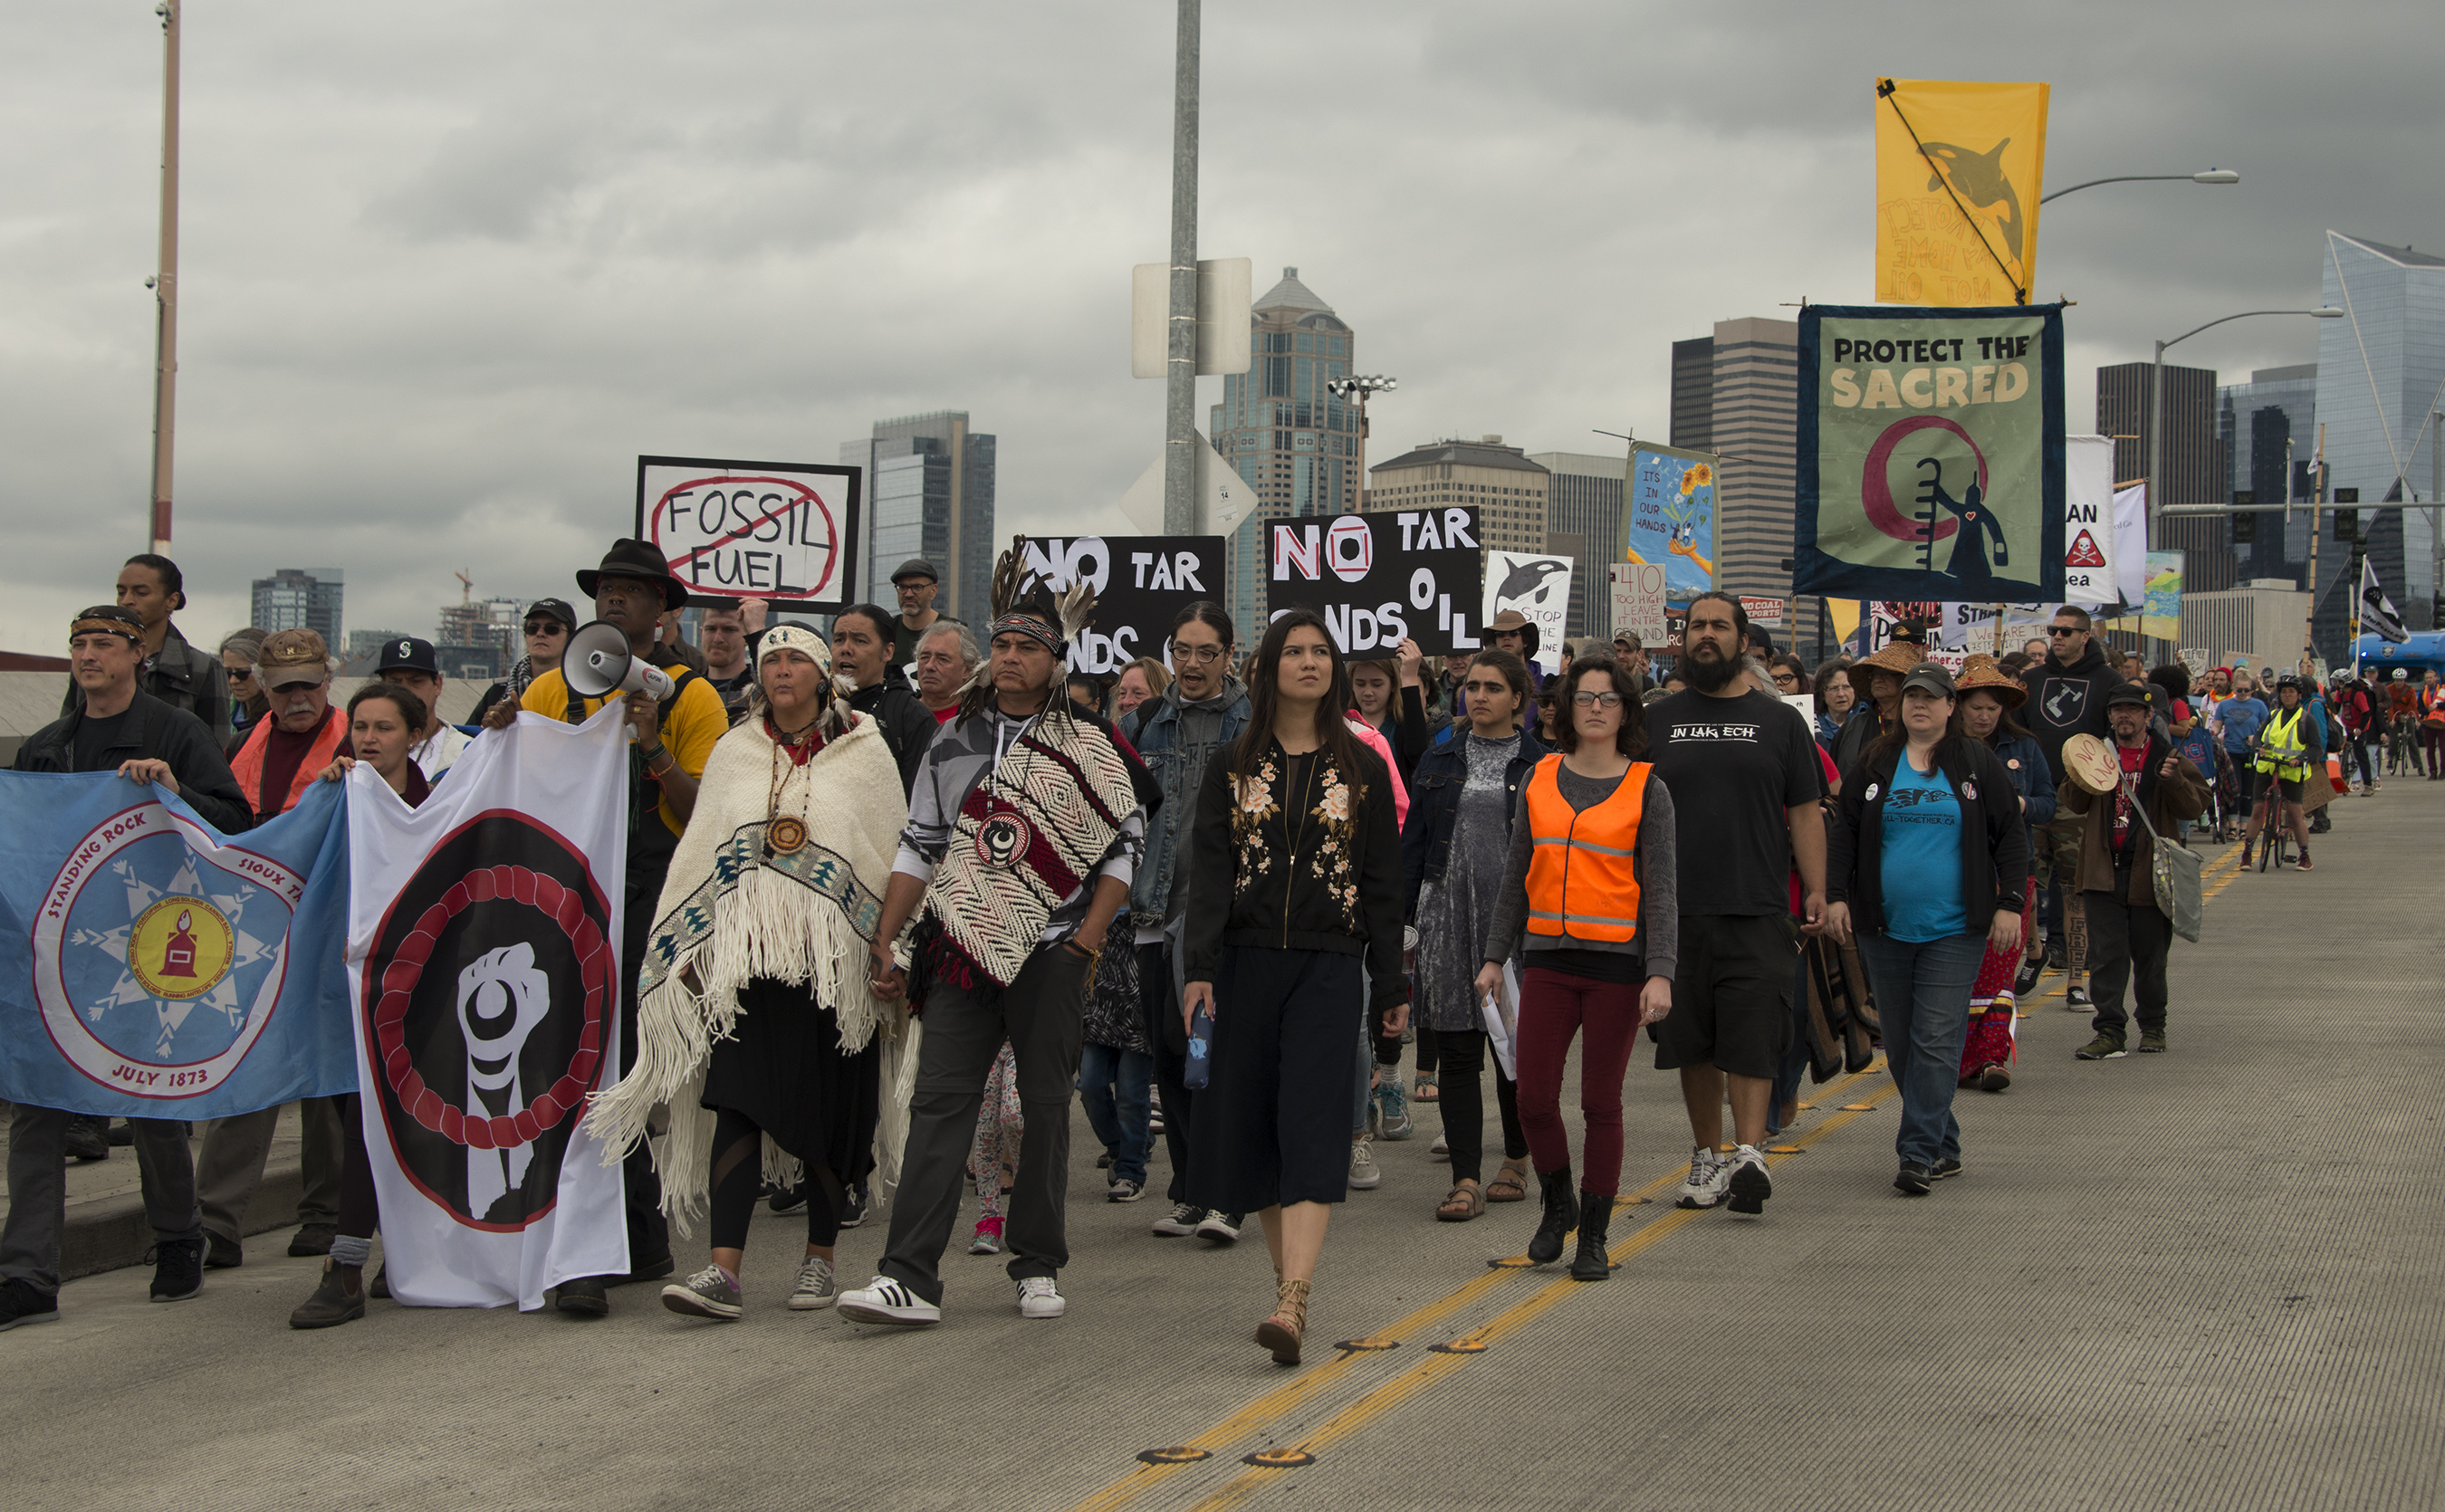 A group of indigenous protestors crossing a bridge holding colorful signs in protest of Fracked Gas and Fossil Fuels